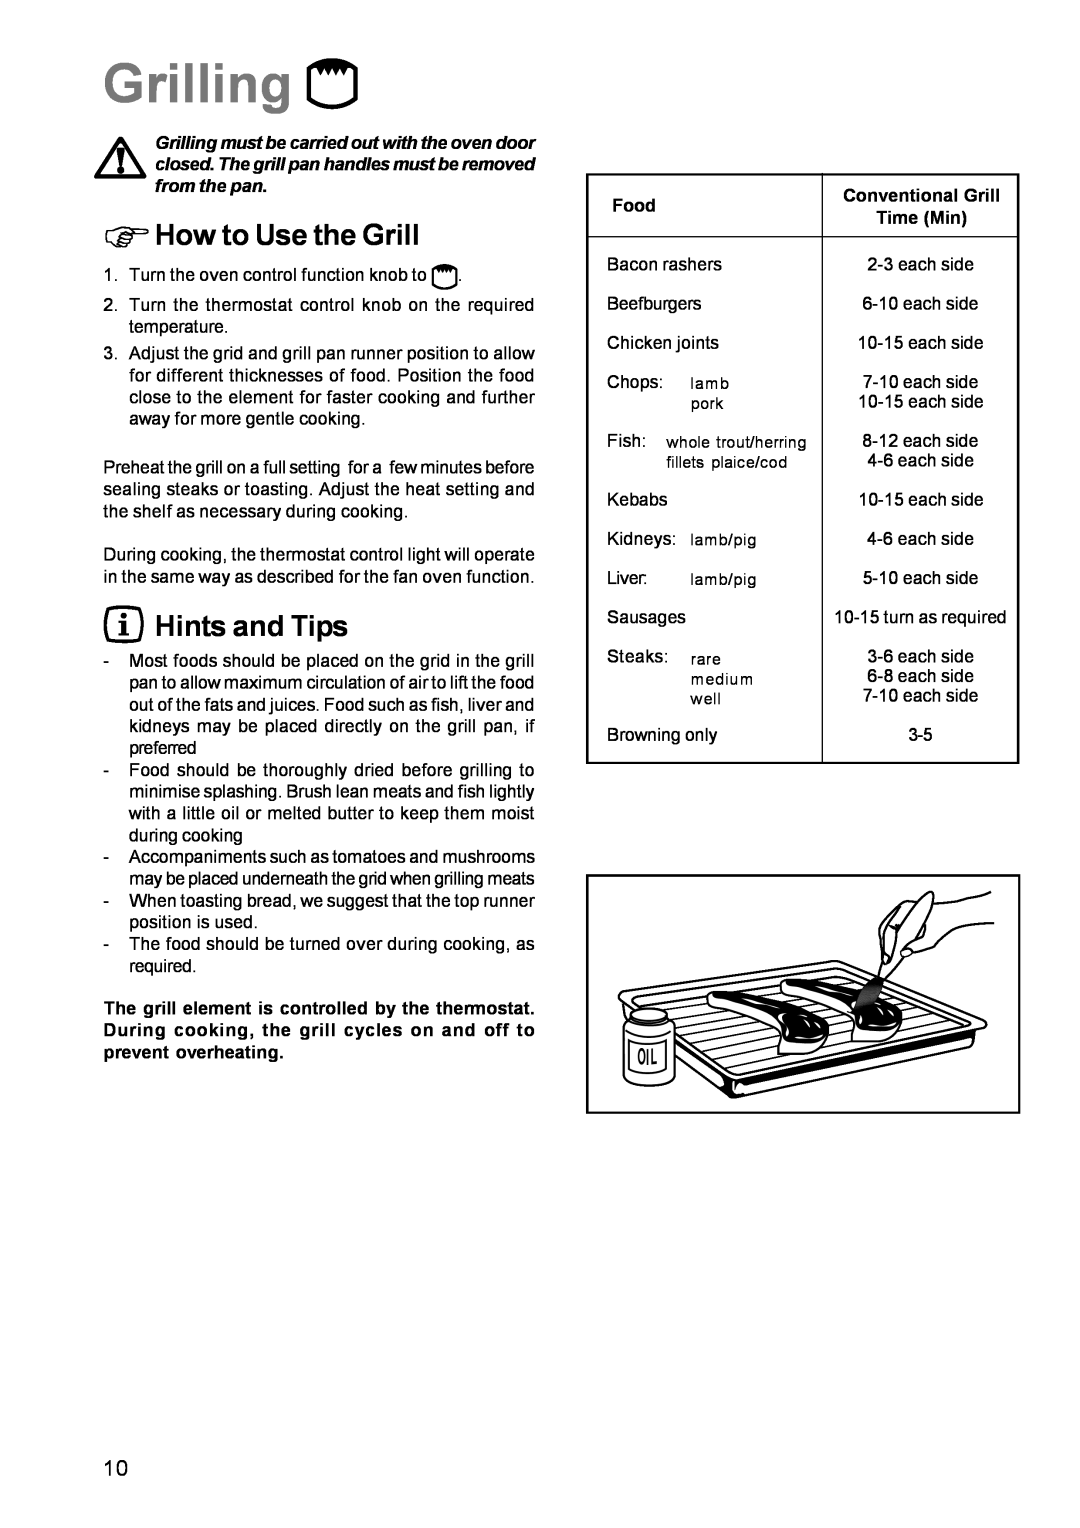 Parkinson Cowan CSIM 509 manual Grilling, ΦHow to Use the Grill, Hints and Tips 